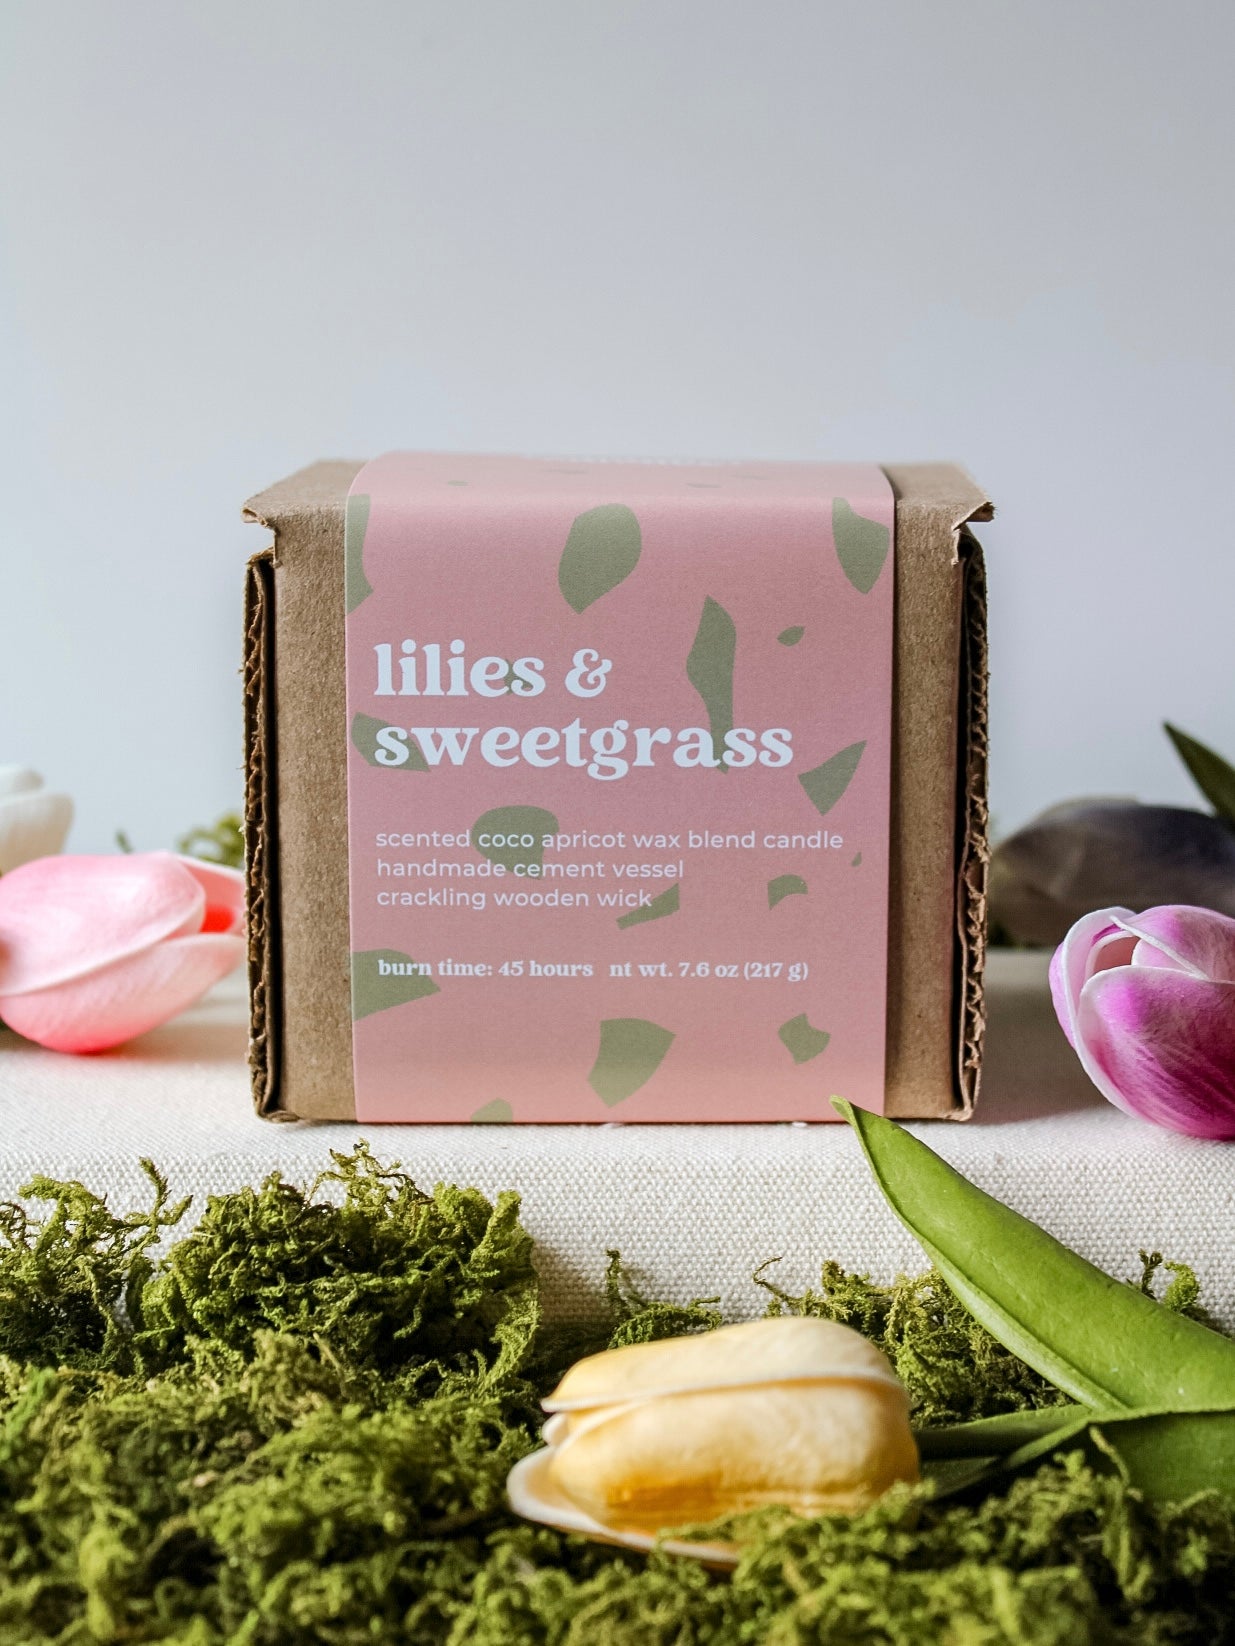 lilies & sweetgrass candle